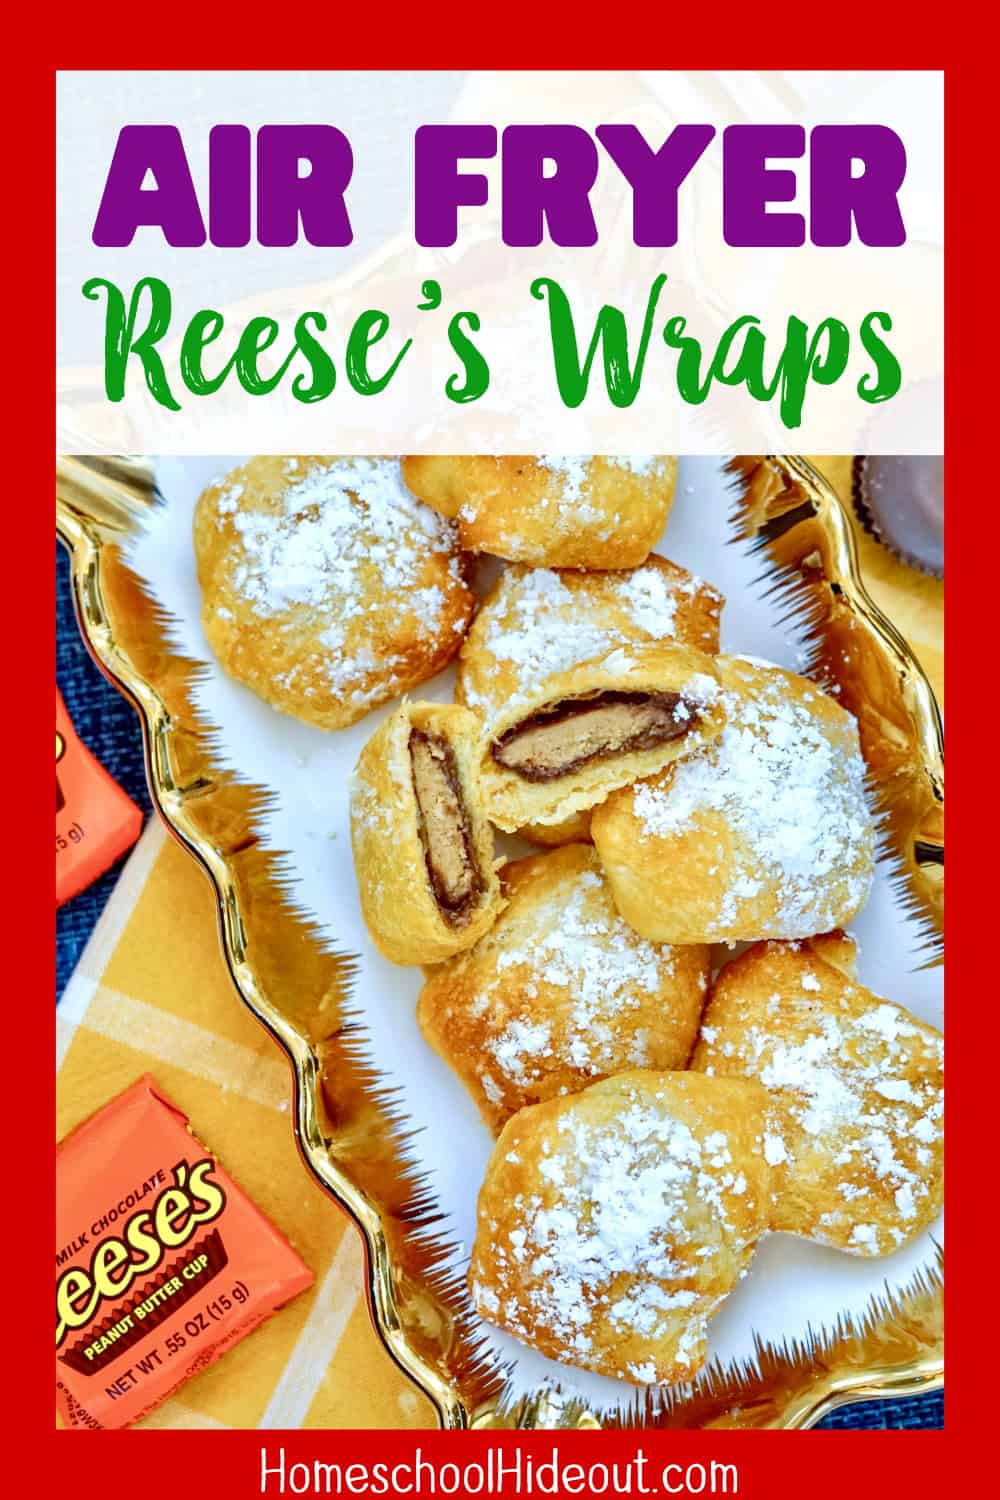 These Reese's Wraps are my current favorite air fryer dessert! Quick and easy to whip up and super affordable! Not to mention, REESE'S, hello!